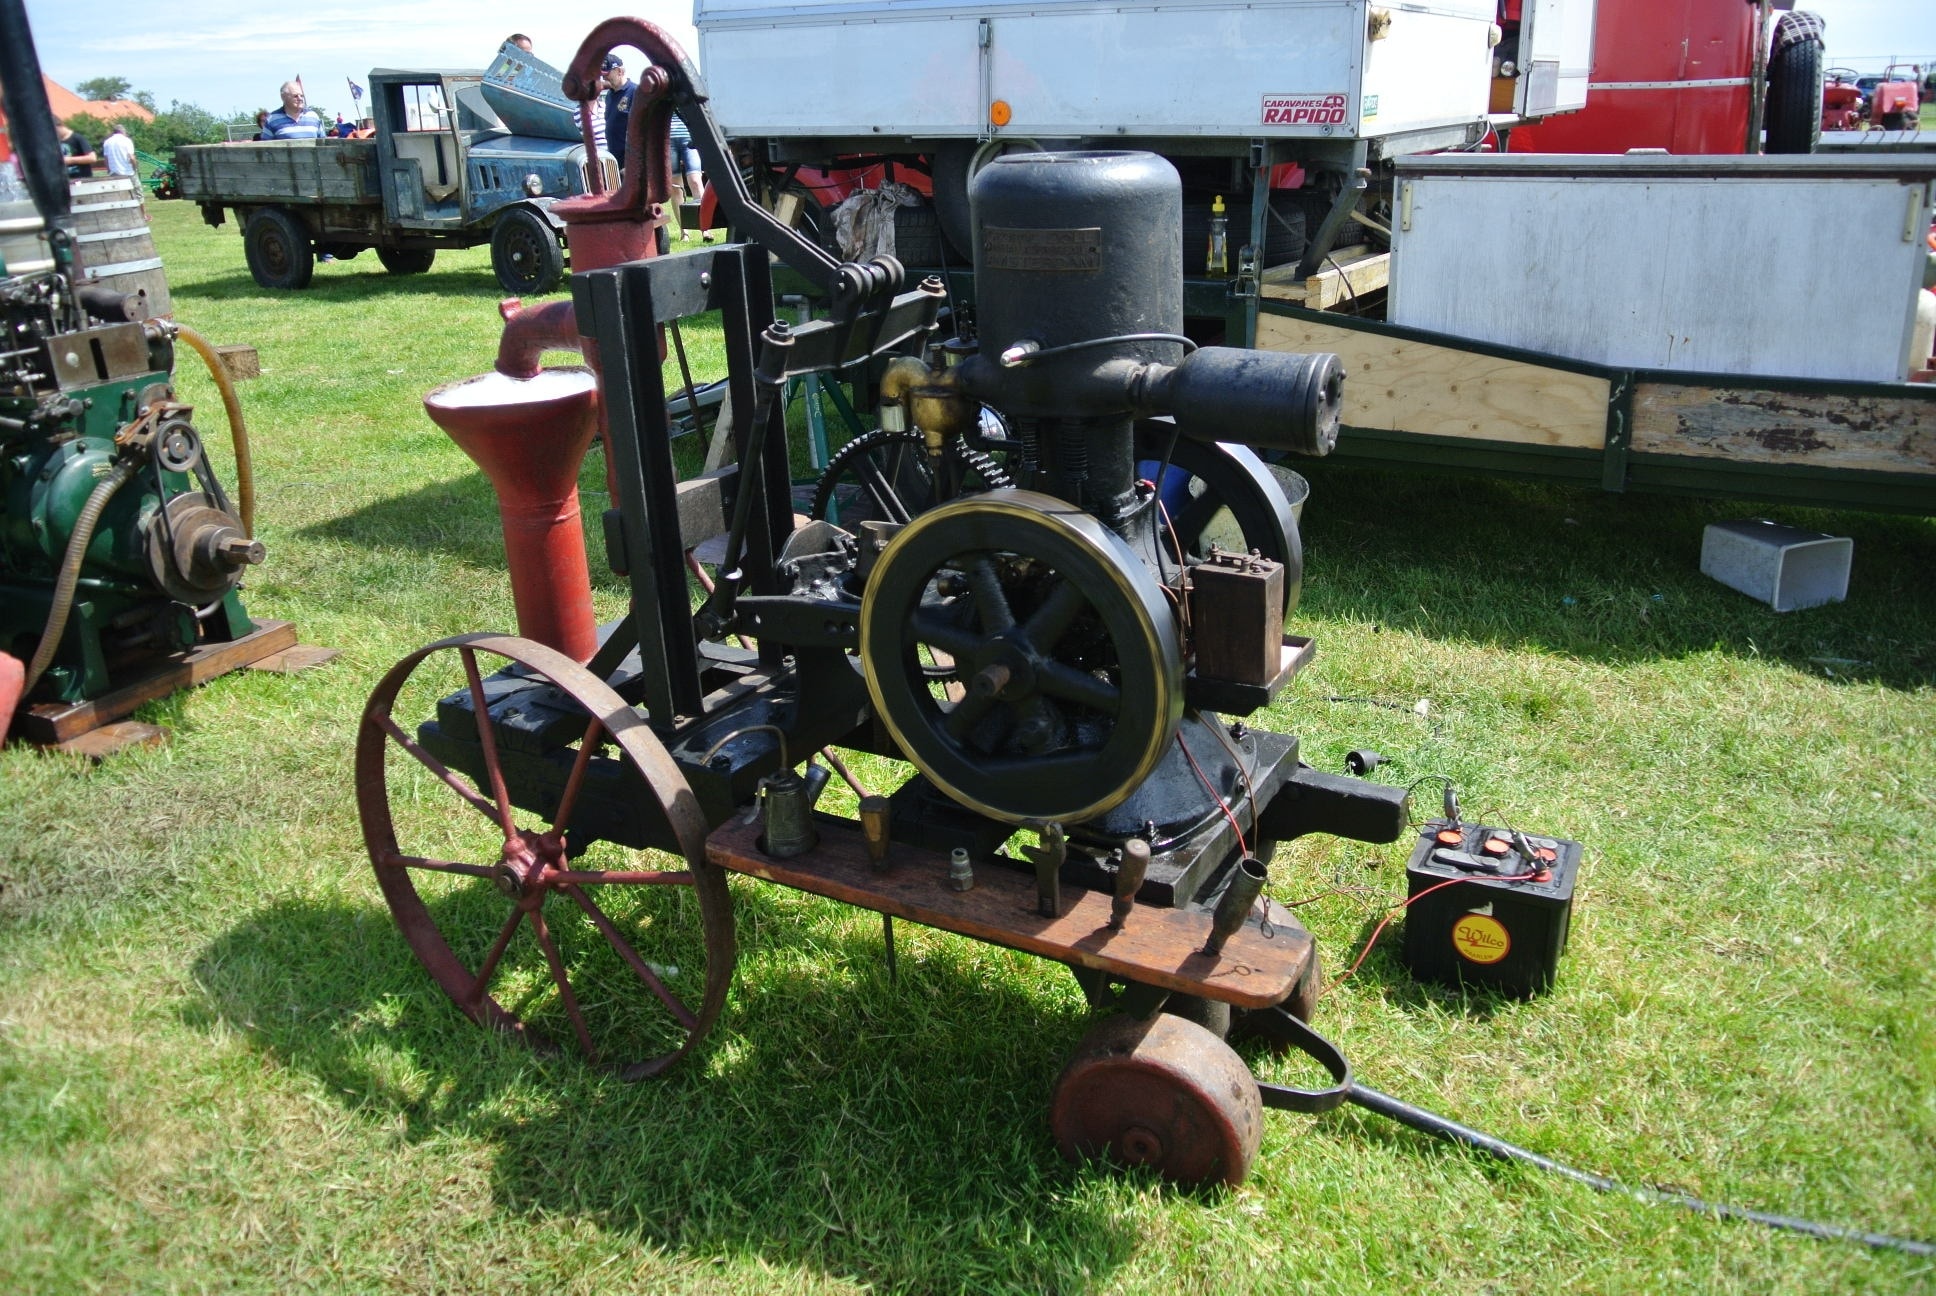 black and red metal machine with battery on lawn yard during daytime